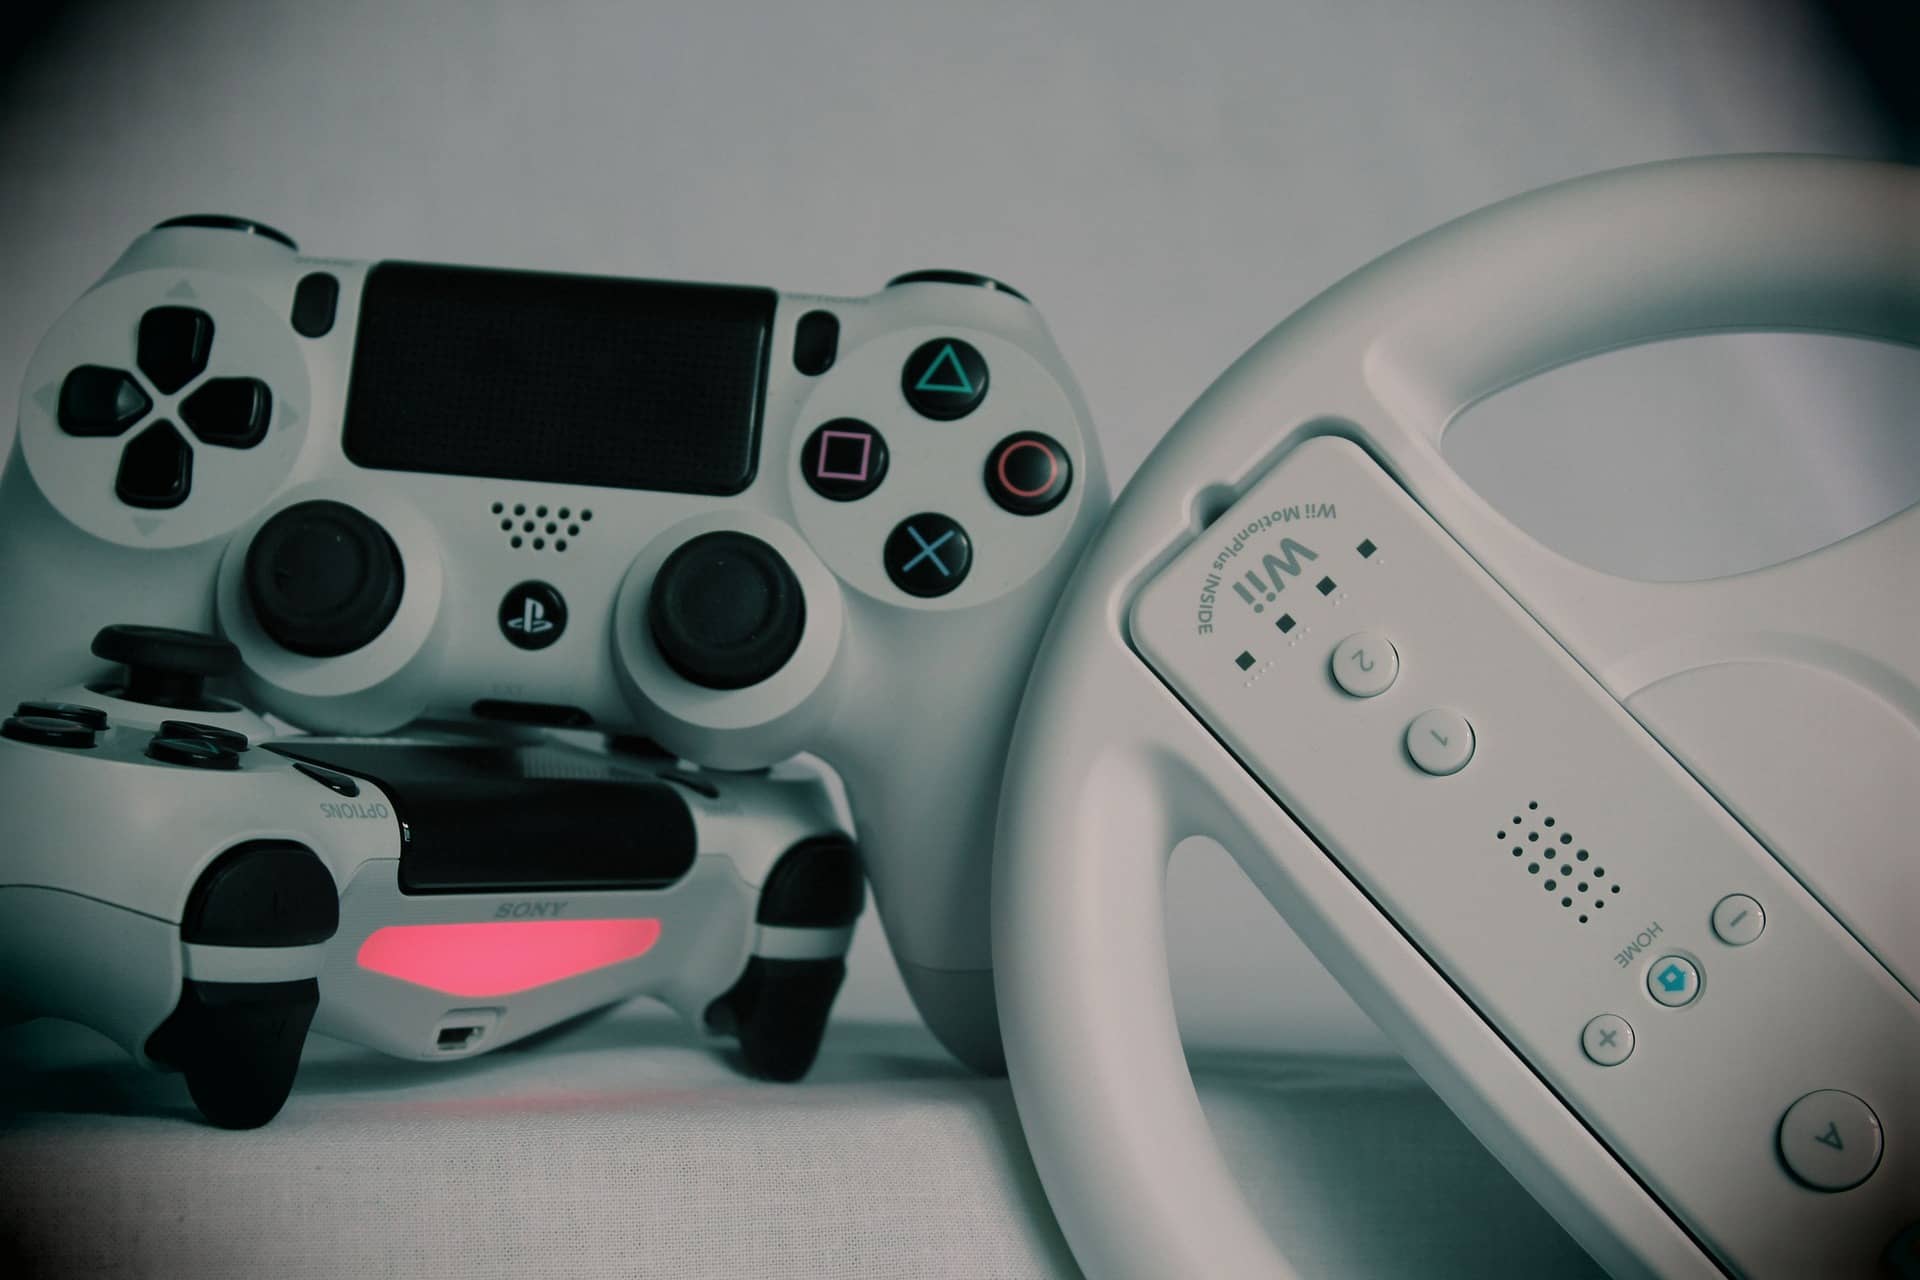 Gallery of gaming controllers and consoles